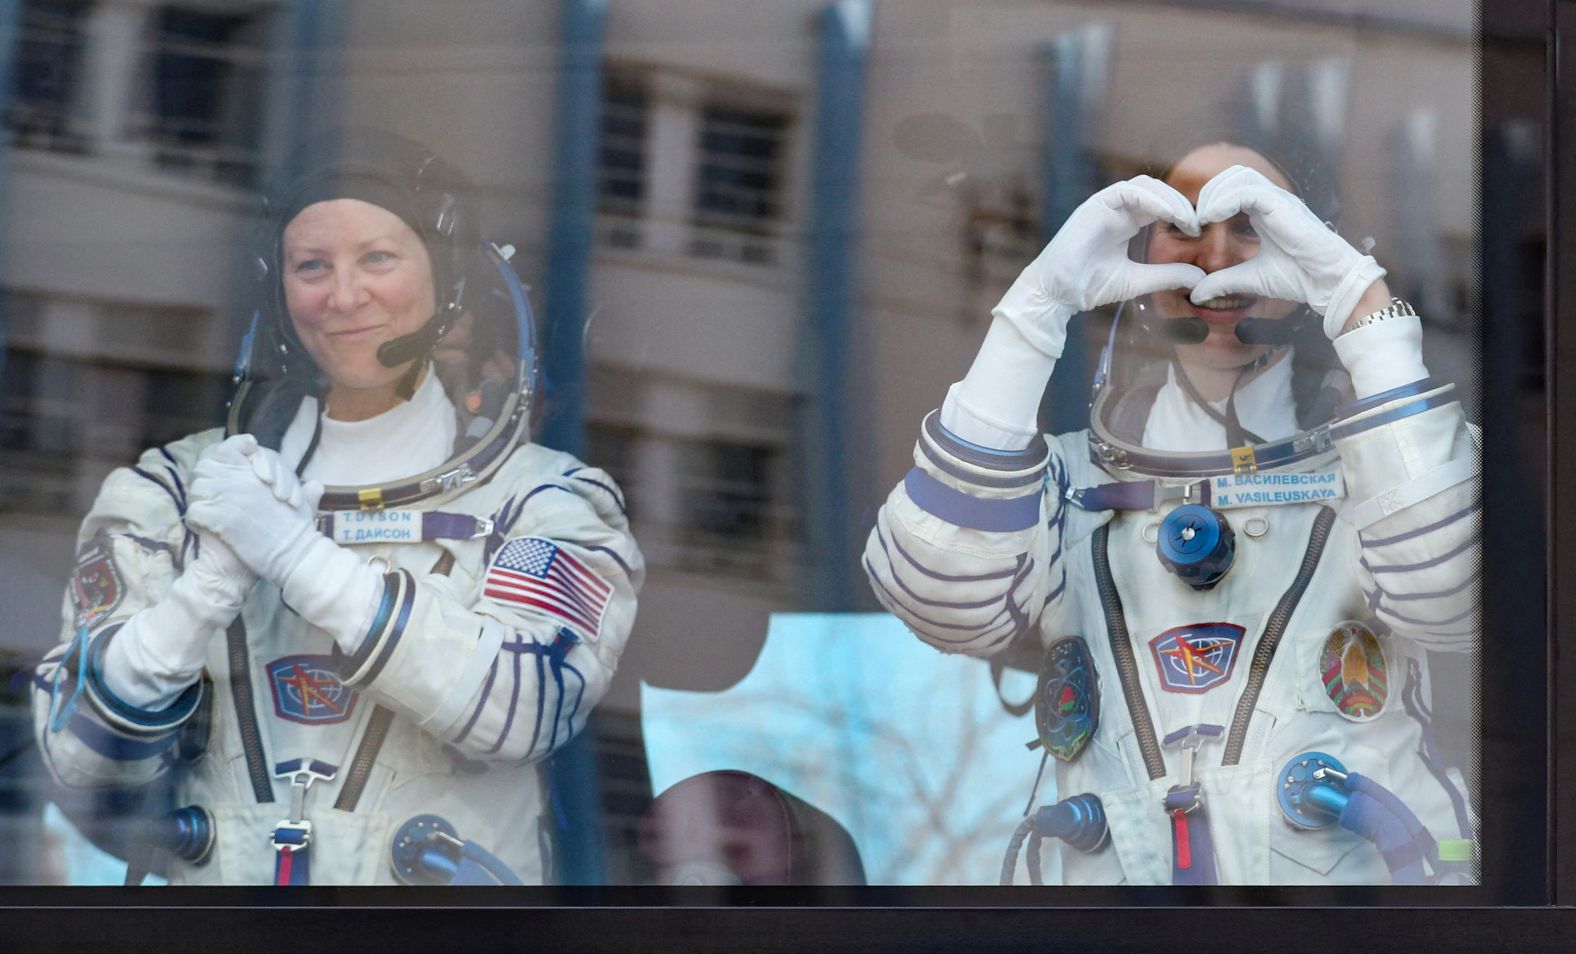 NASA astronaut Tracy Dyson and spaceflight participant Marina Vasilevskaya of Belarus react during their space suit check before their scheduled launch to the International Space Station from the Baikonur Cosmodrome in Kazakhstan on Thursday, March 21. <a href="https://www.cnn.com/2024/03/21/world/soyuz-crew-safe-launch-abort-scn/index.html" target="_blank">The launch was automatically aborted</a> 20 seconds before it was set to occur, according to a live NASA broadcast. The crew's next opportunity to launch is Saturday morning, but that depends on whether engineers can determine the cause of the automatic abort and if it can be resolved in time.